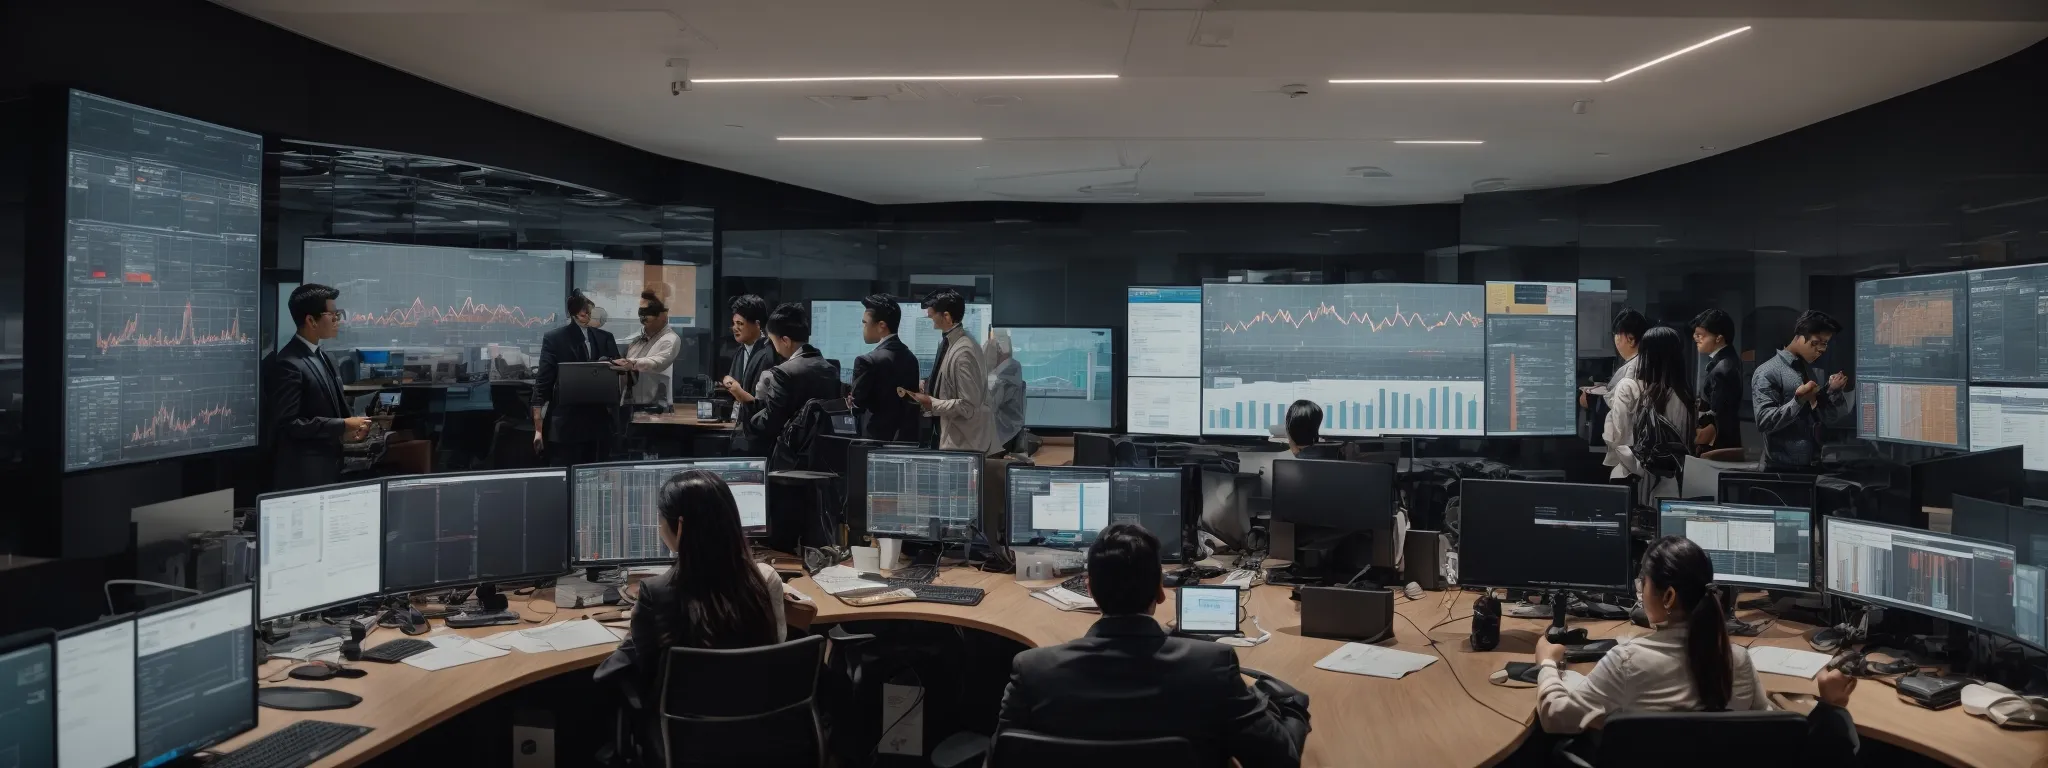 a bustling digital marketing office with teams collaboratively planning and strategizing around a large screen displaying analytics graphs.